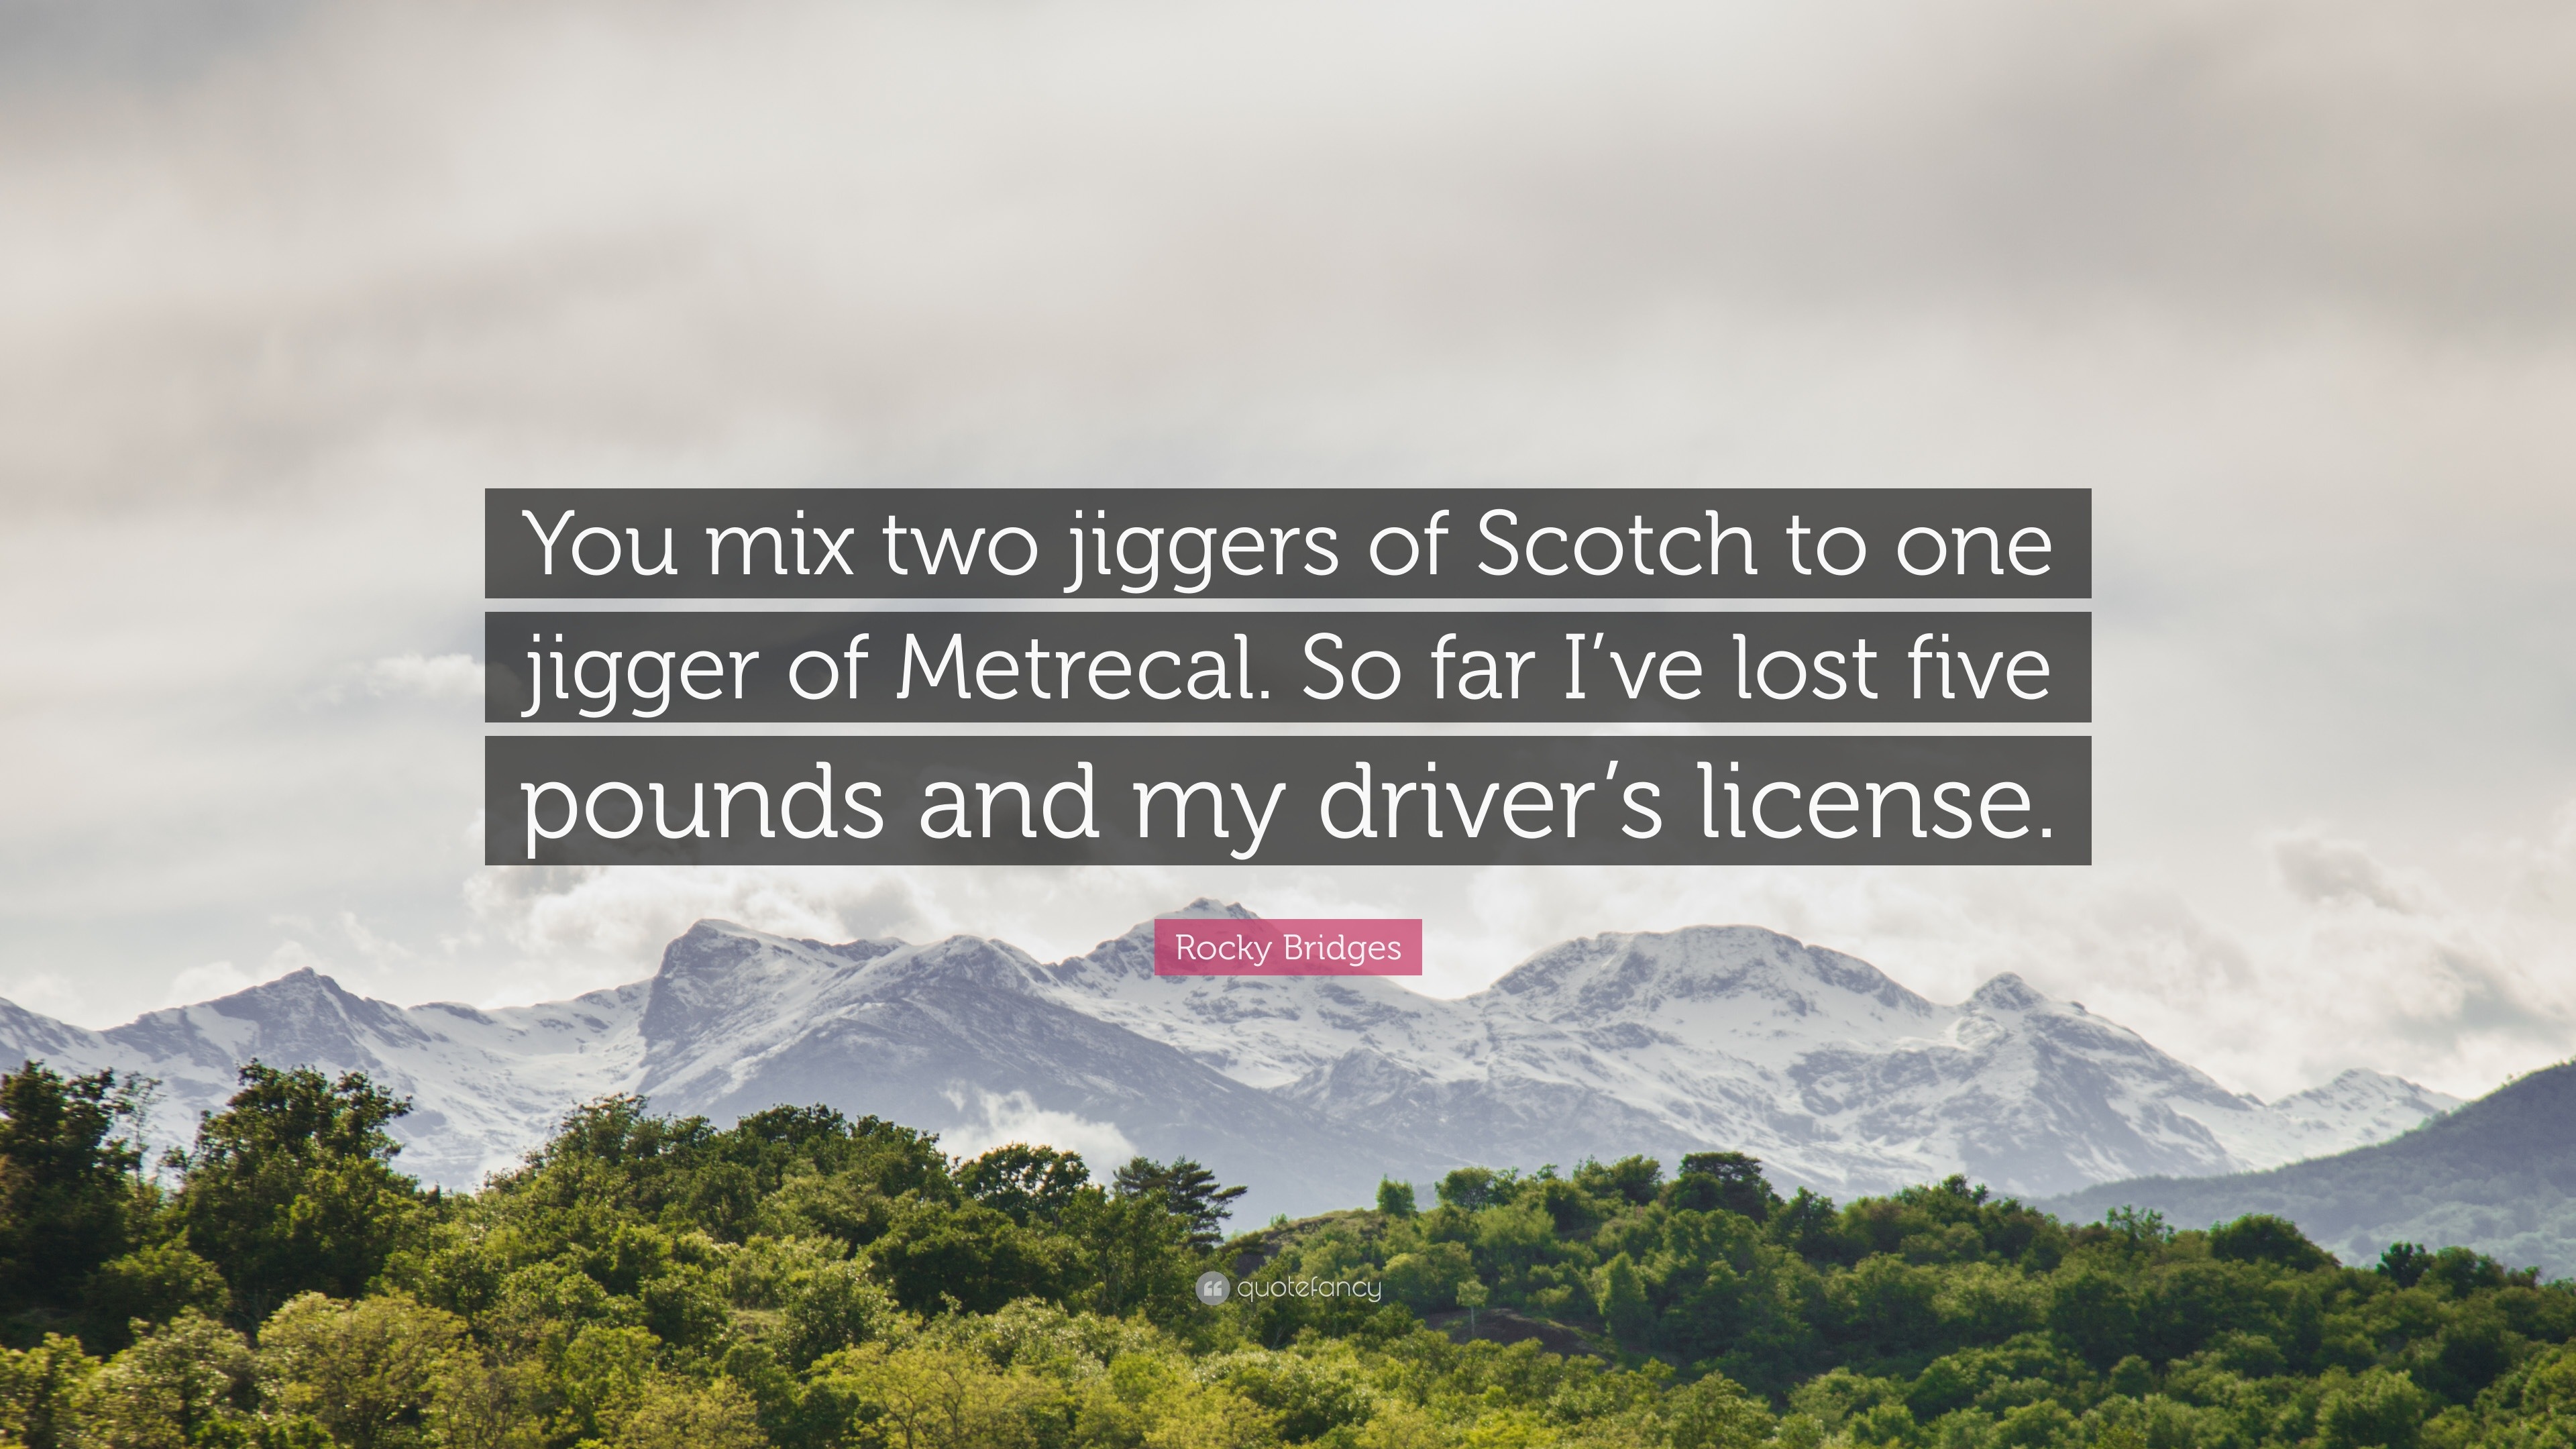 https://quotefancy.com/media/wallpaper/3840x2160/1548264-Rocky-Bridges-Quote-You-mix-two-jiggers-of-Scotch-to-one-jigger-of.jpg